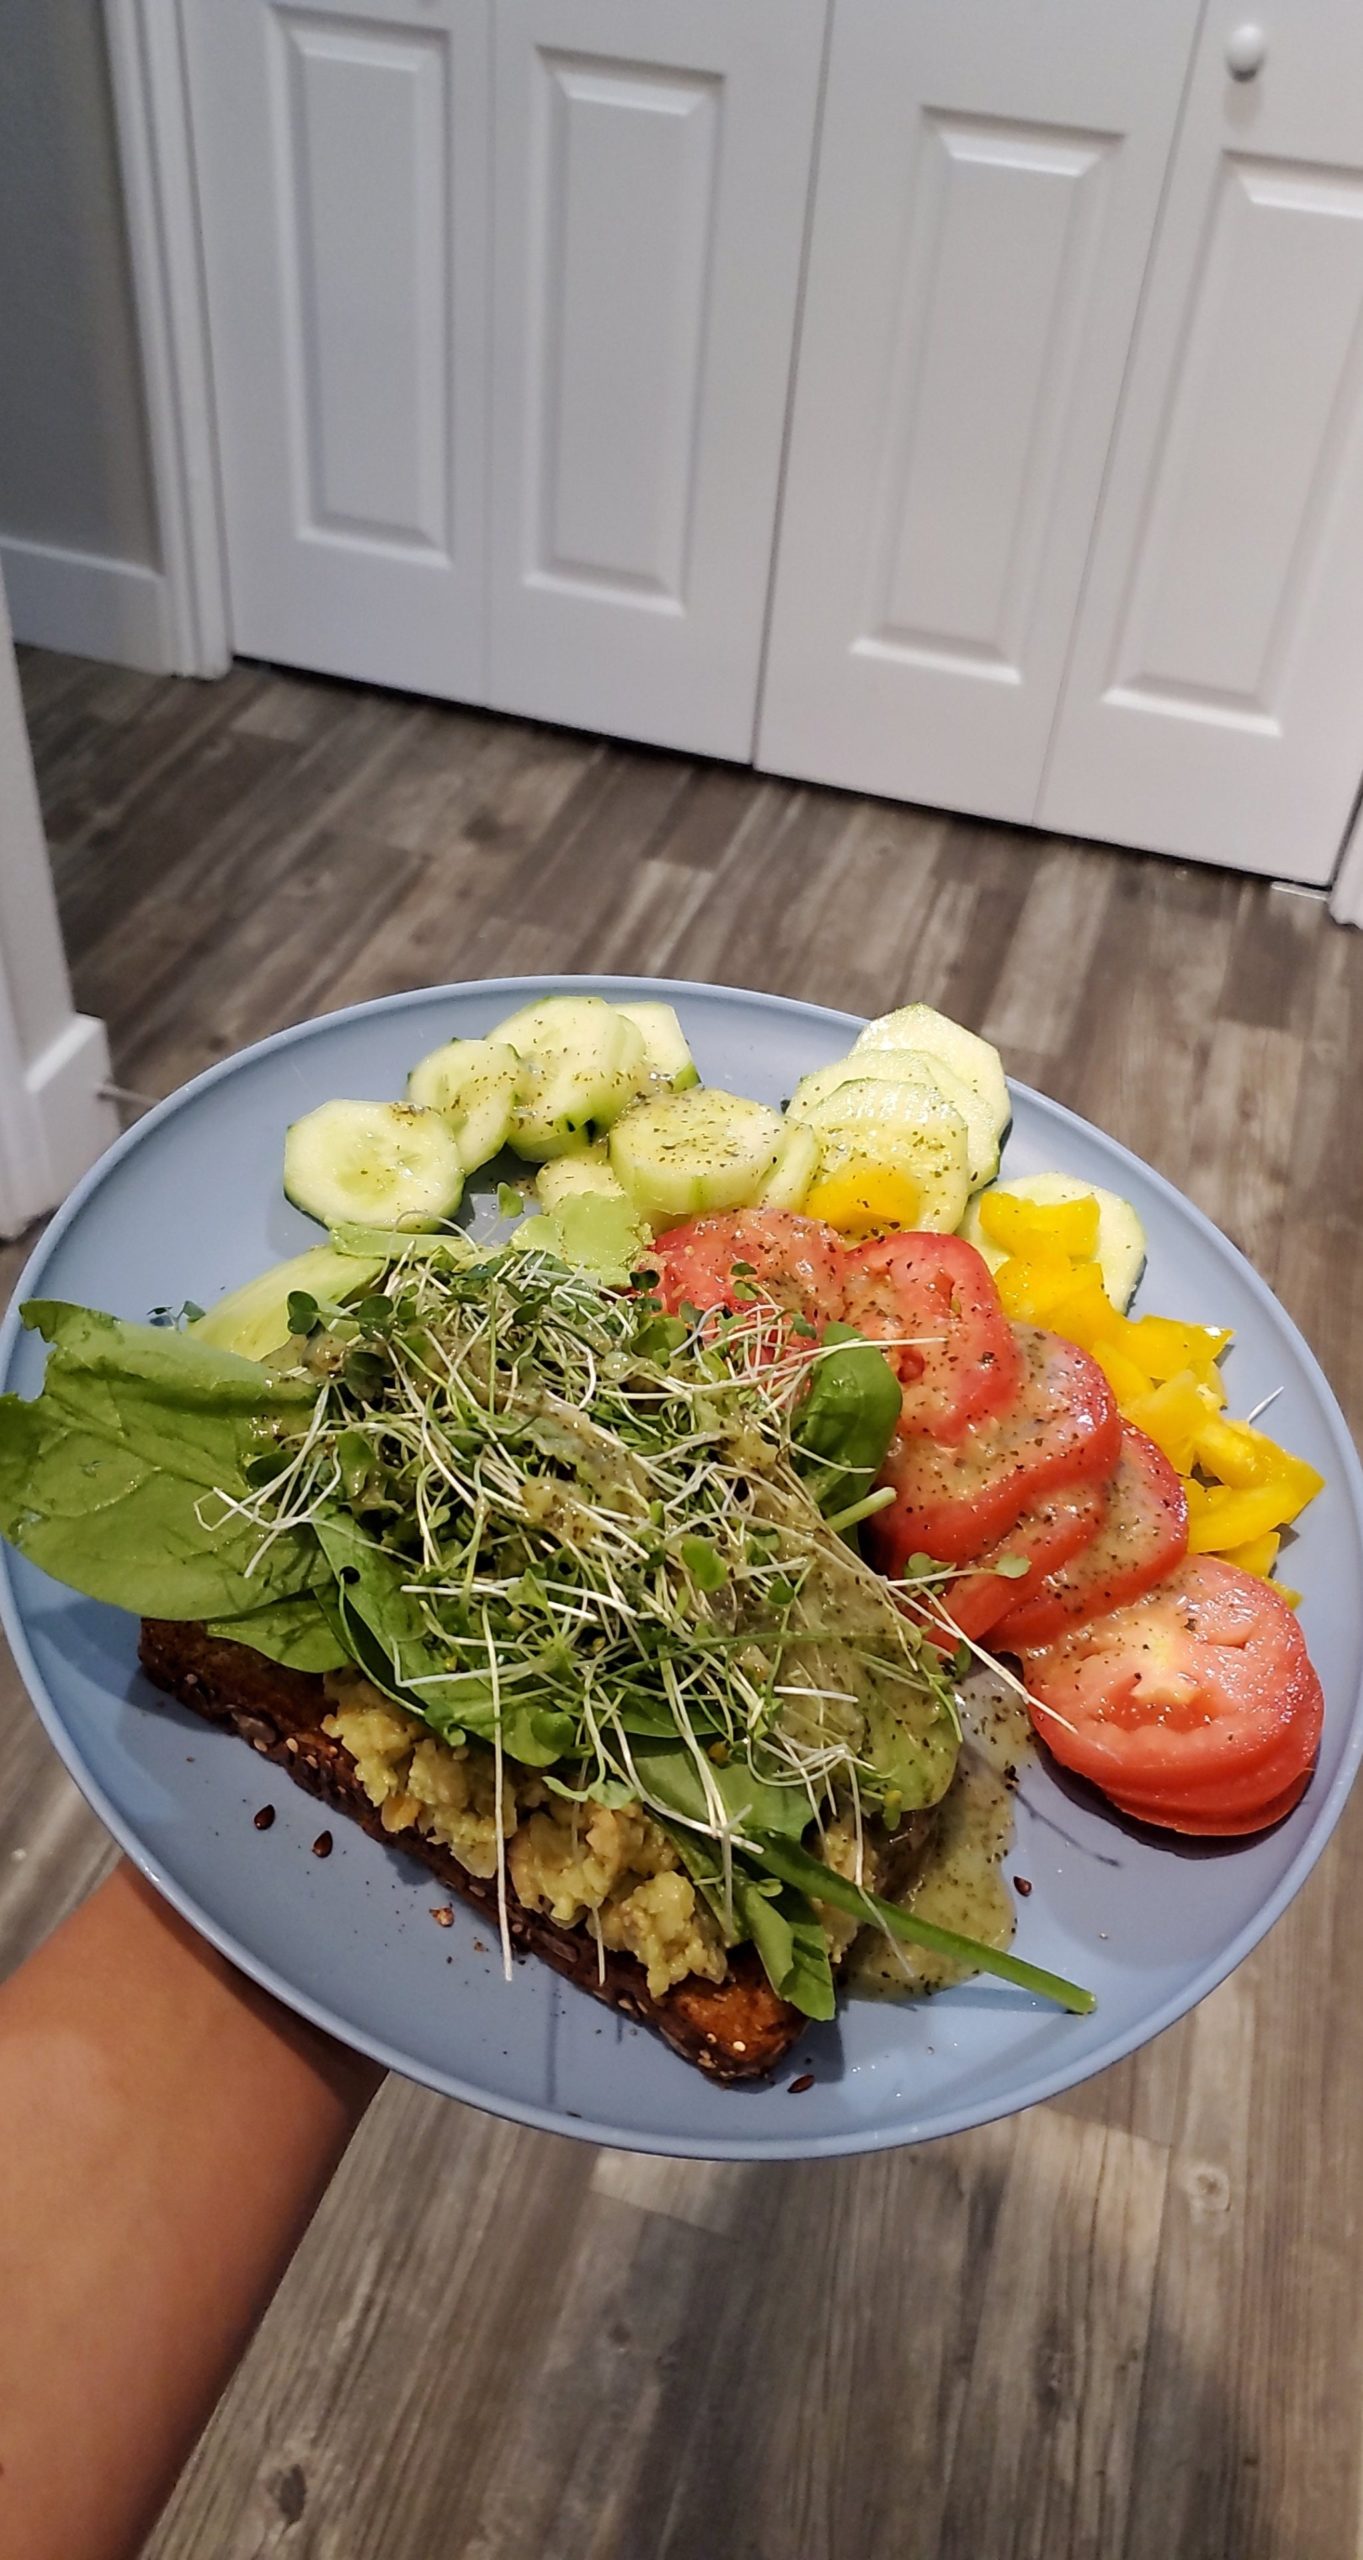 A local health fast food place inspired this one! Whole grain toast ...